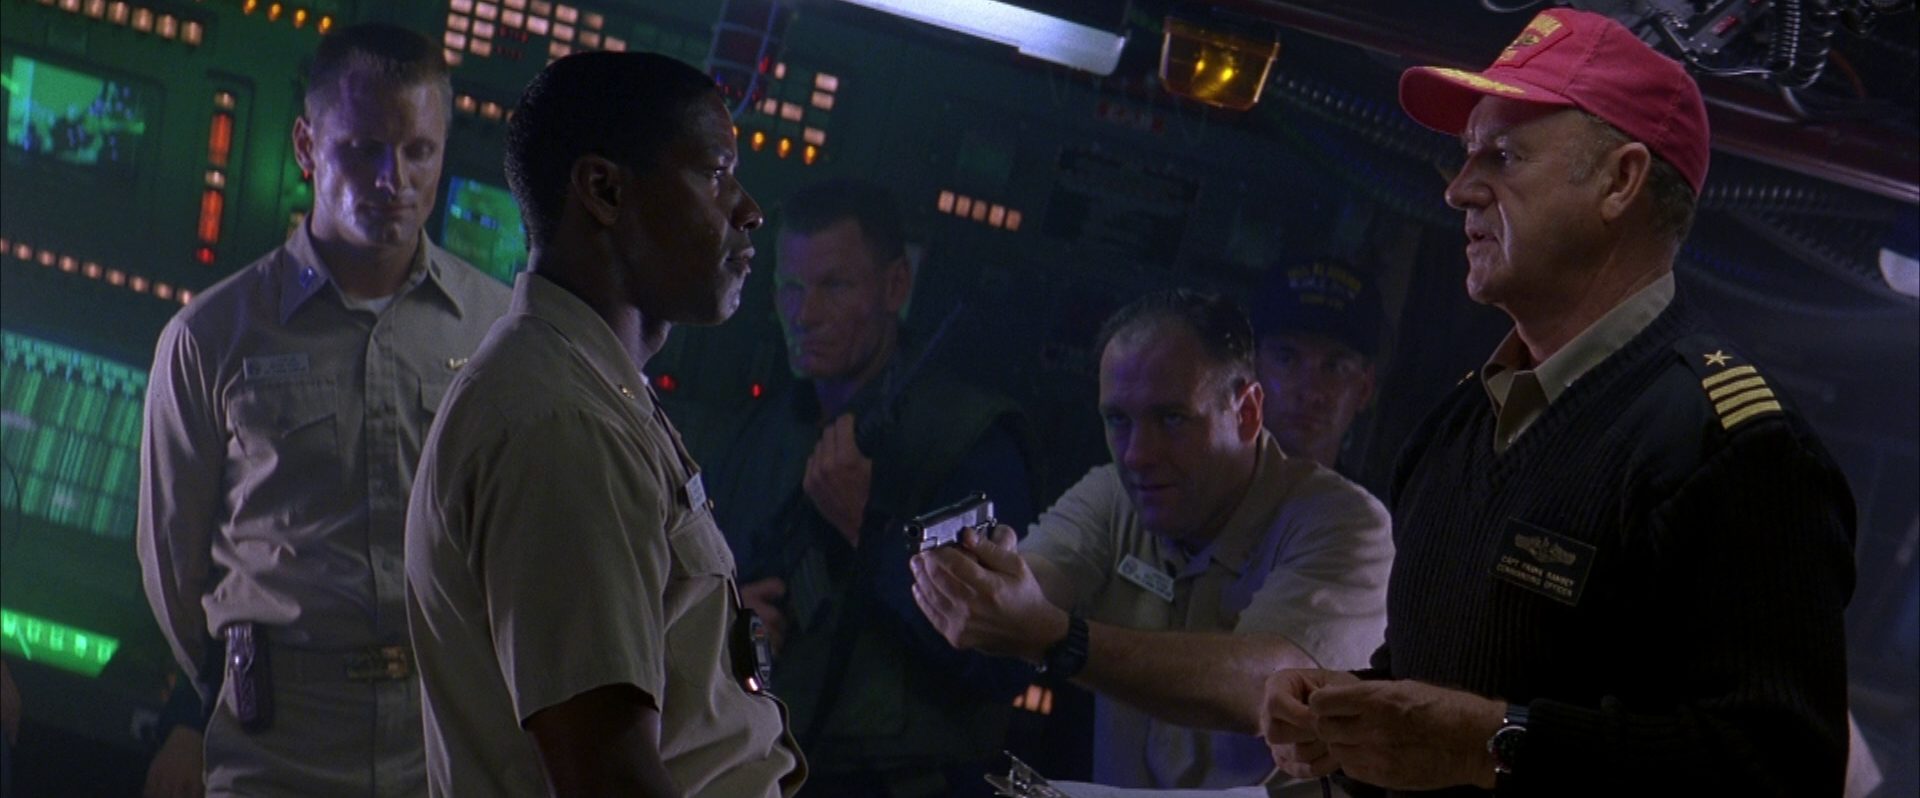 Confrontation between Denzel Washington as First Officer and Gene Hackman as Commander; a crew member points the gun at the first officer, in the background Viggo Mortensen as an officer with his eyes closed.